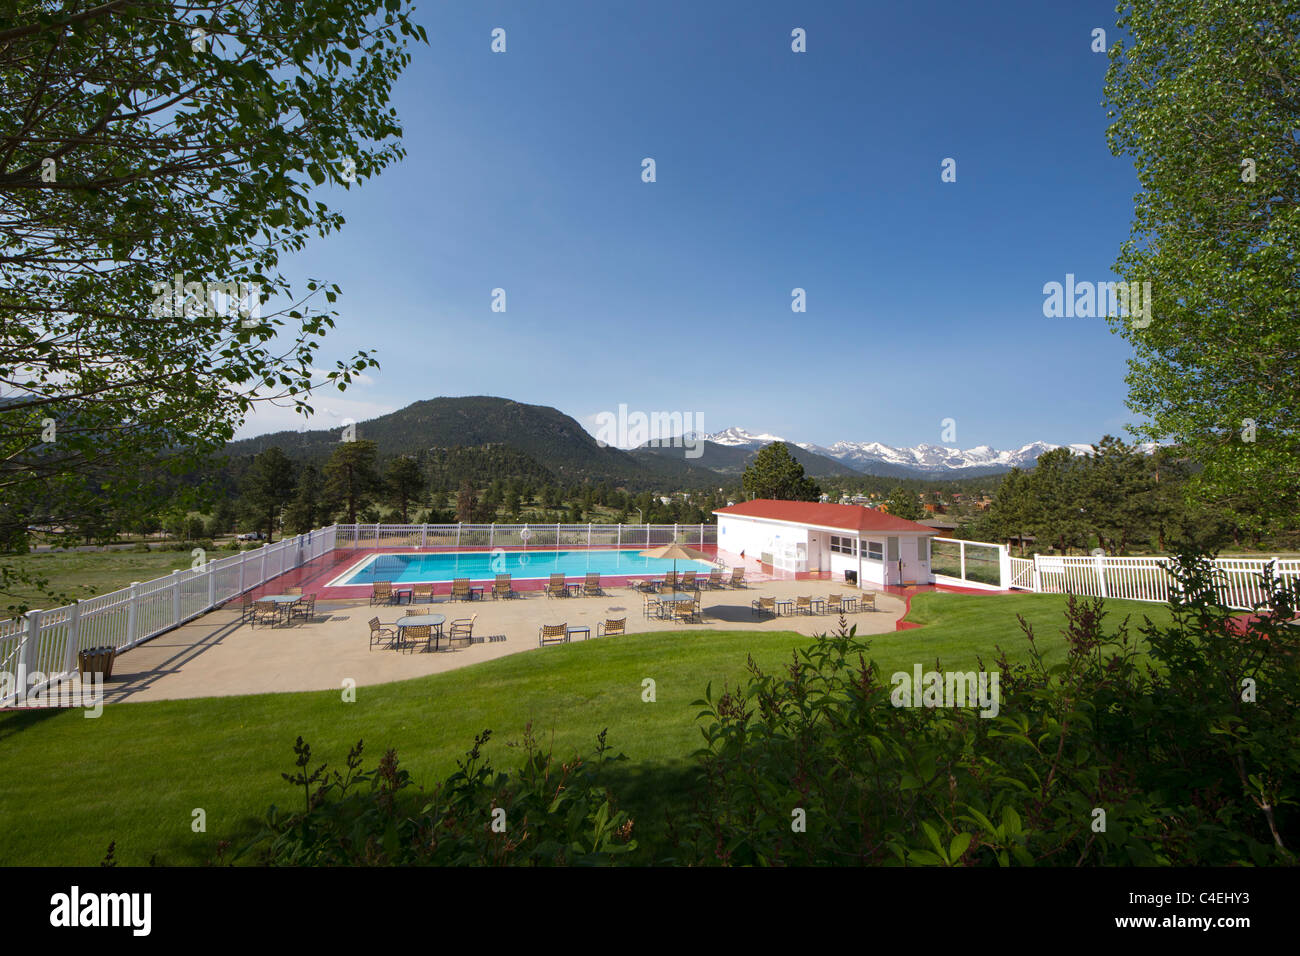 https://c8.alamy.com/comp/C4EHY3/the-swimming-pool-at-the-stanley-hotel-in-estes-park-colorado-provides-C4EHY3.jpg